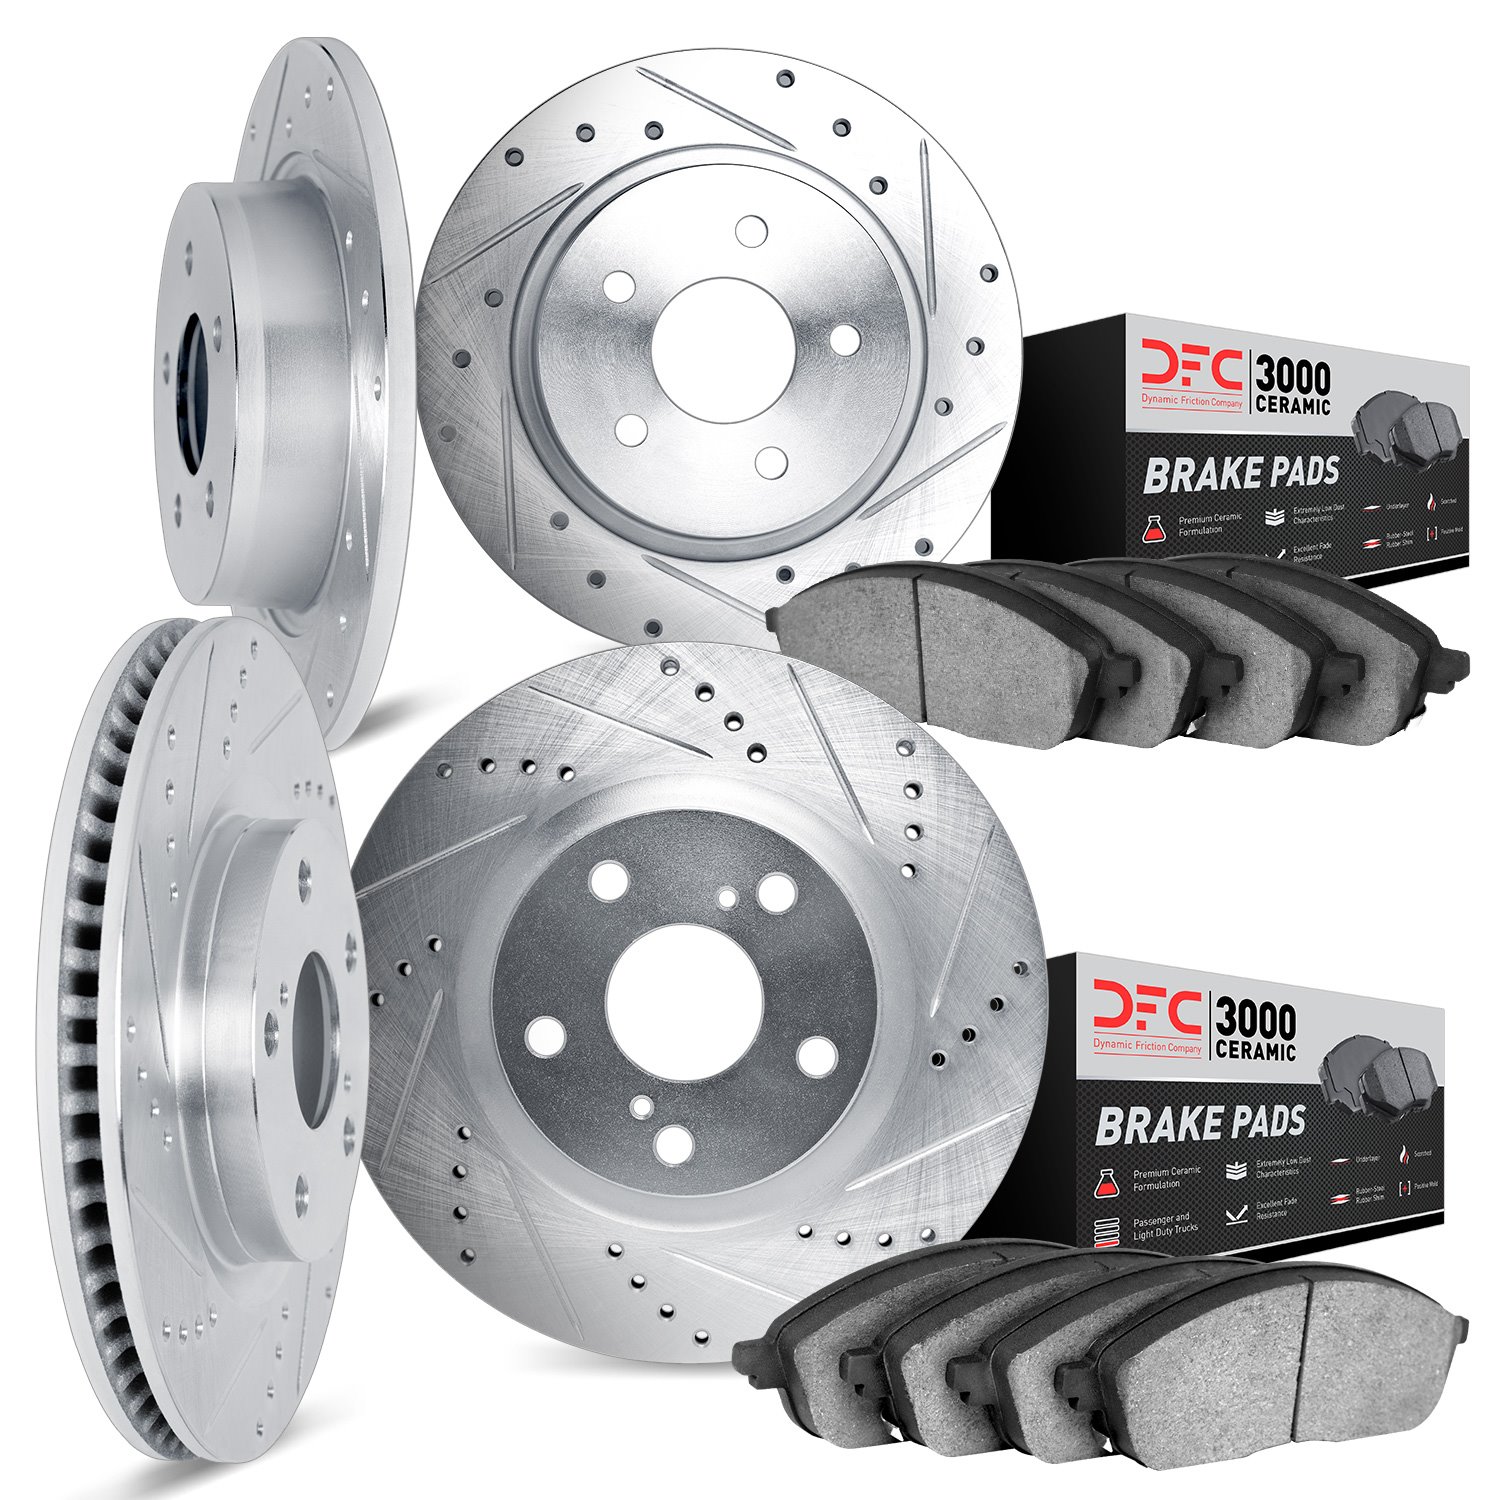 7304-01001 Drilled/Slotted Brake Rotor with 3000-Series Ceramic Brake Pads Kit [Silver], 2014-2019 Suzuki, Position: Front and R